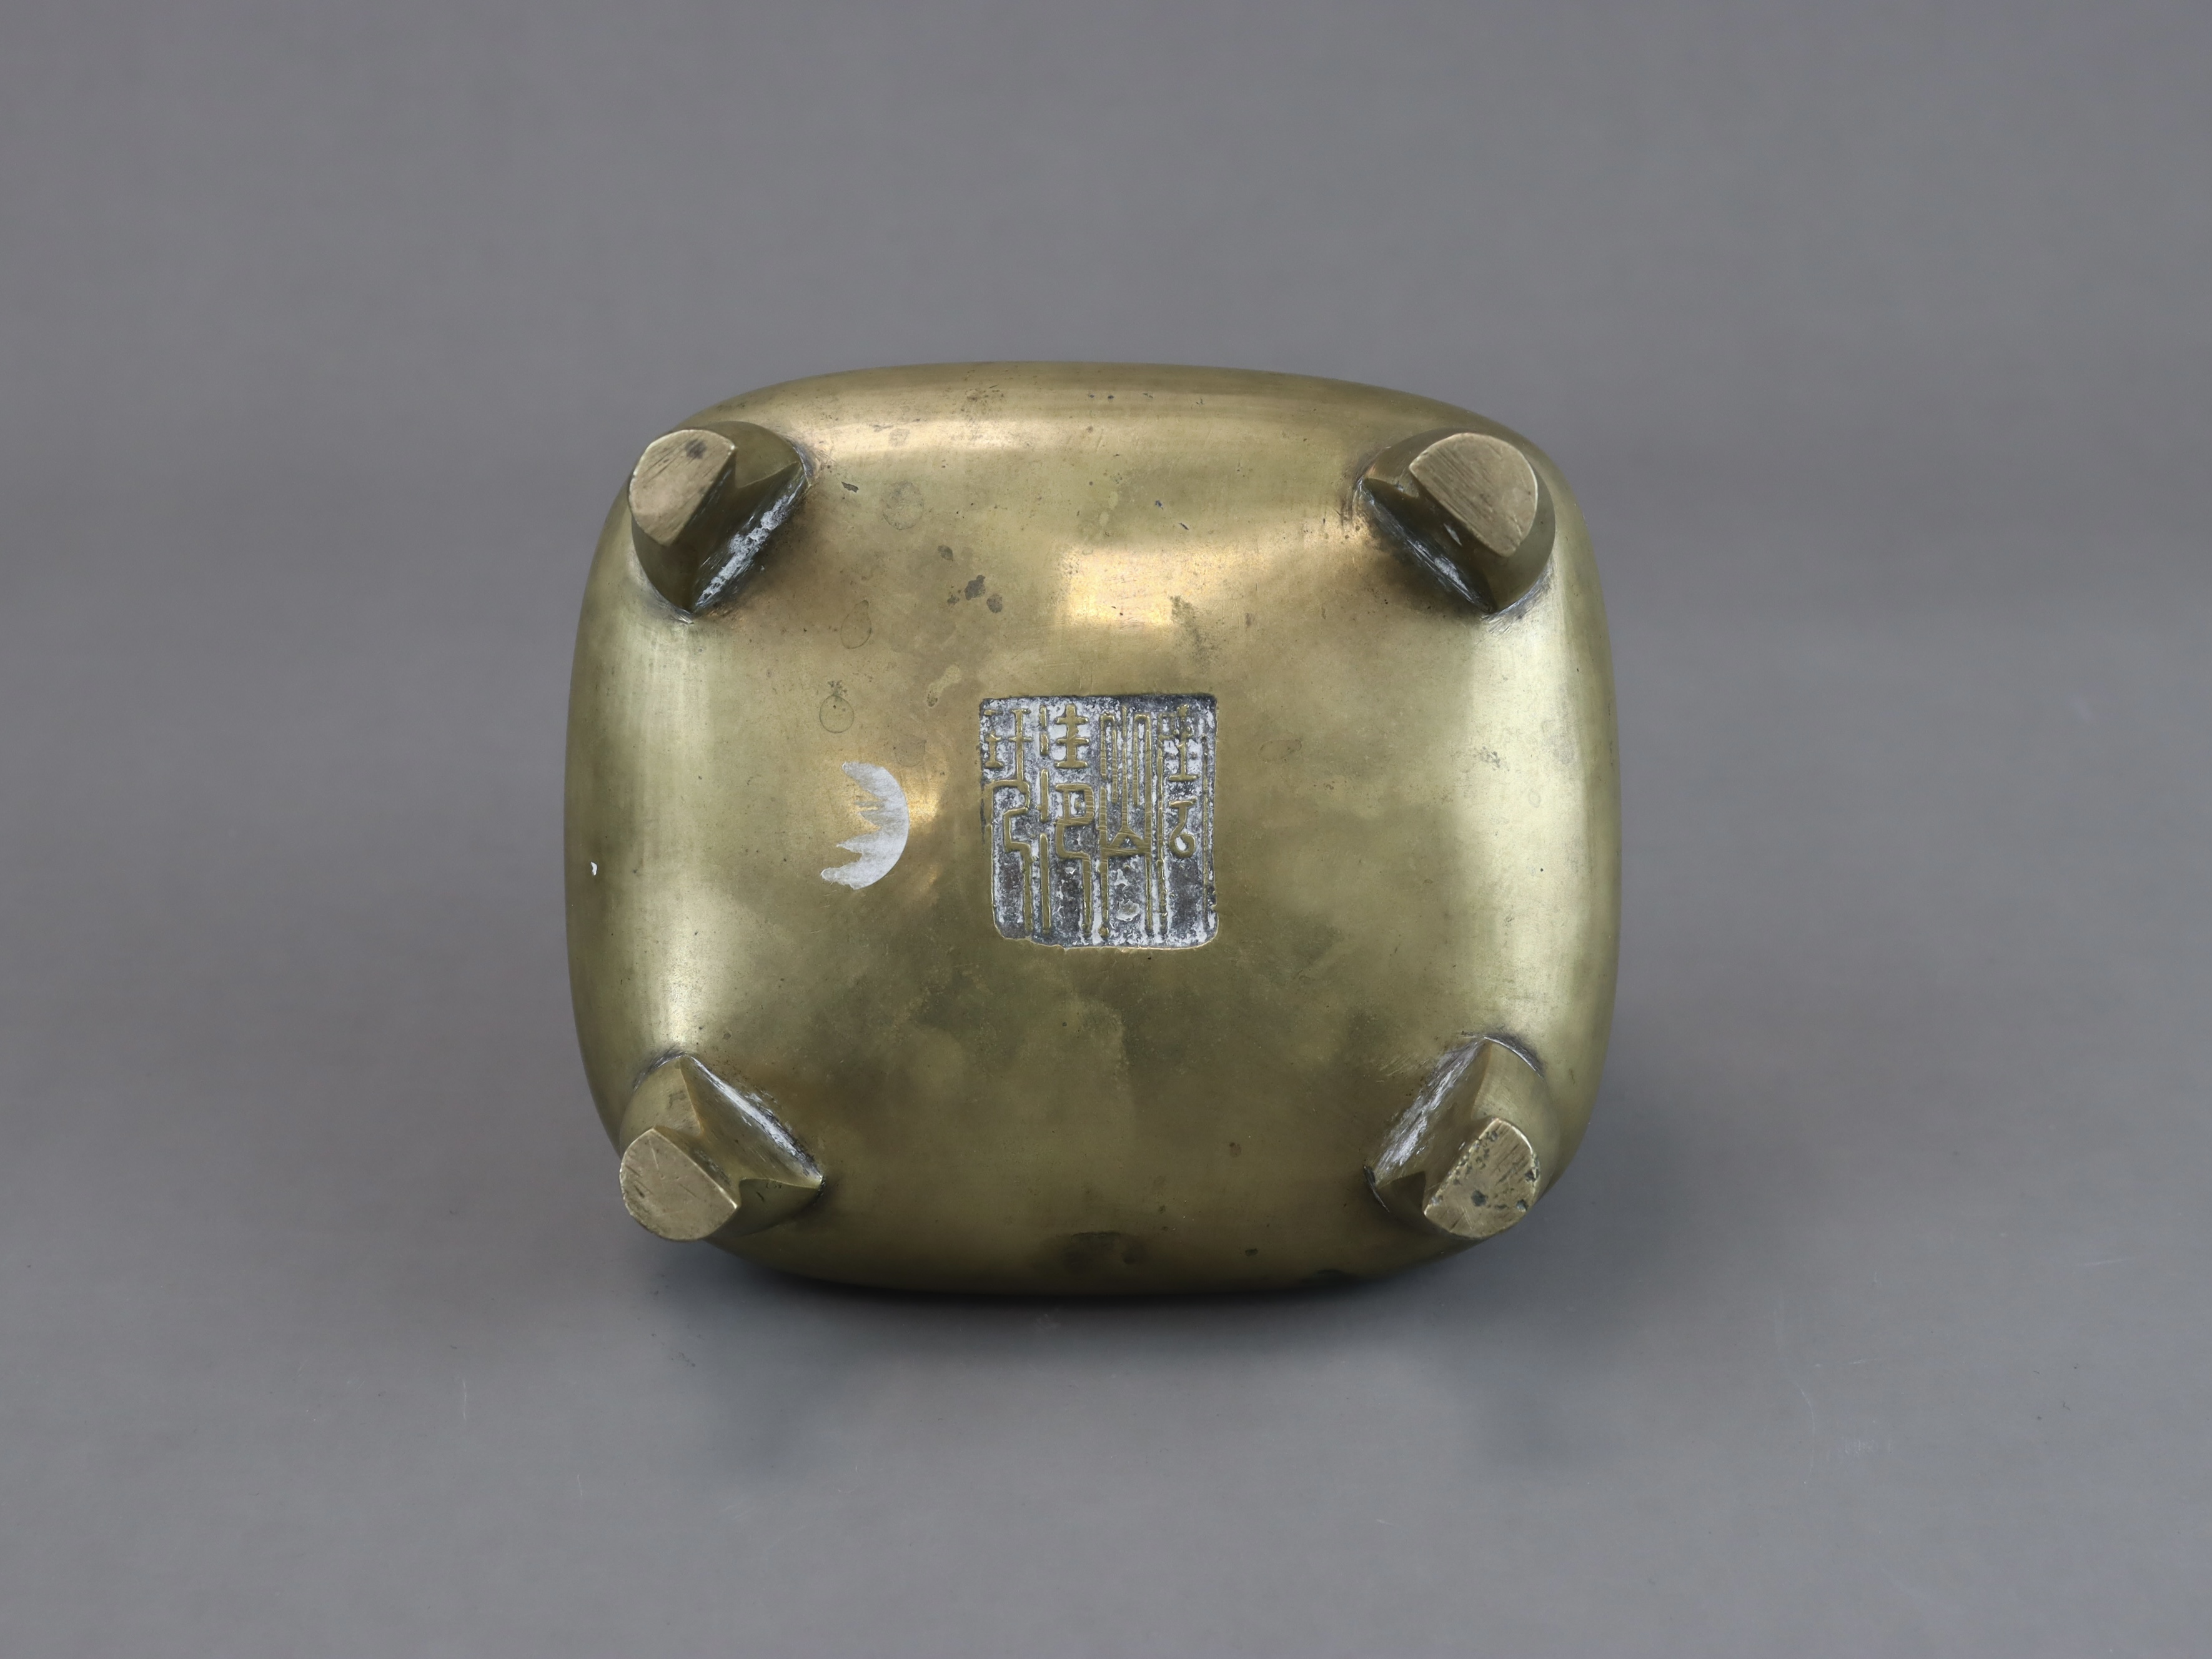 A four legged Bronze Censer, fang ding, seal mark, Qing dynasty - Image 6 of 7